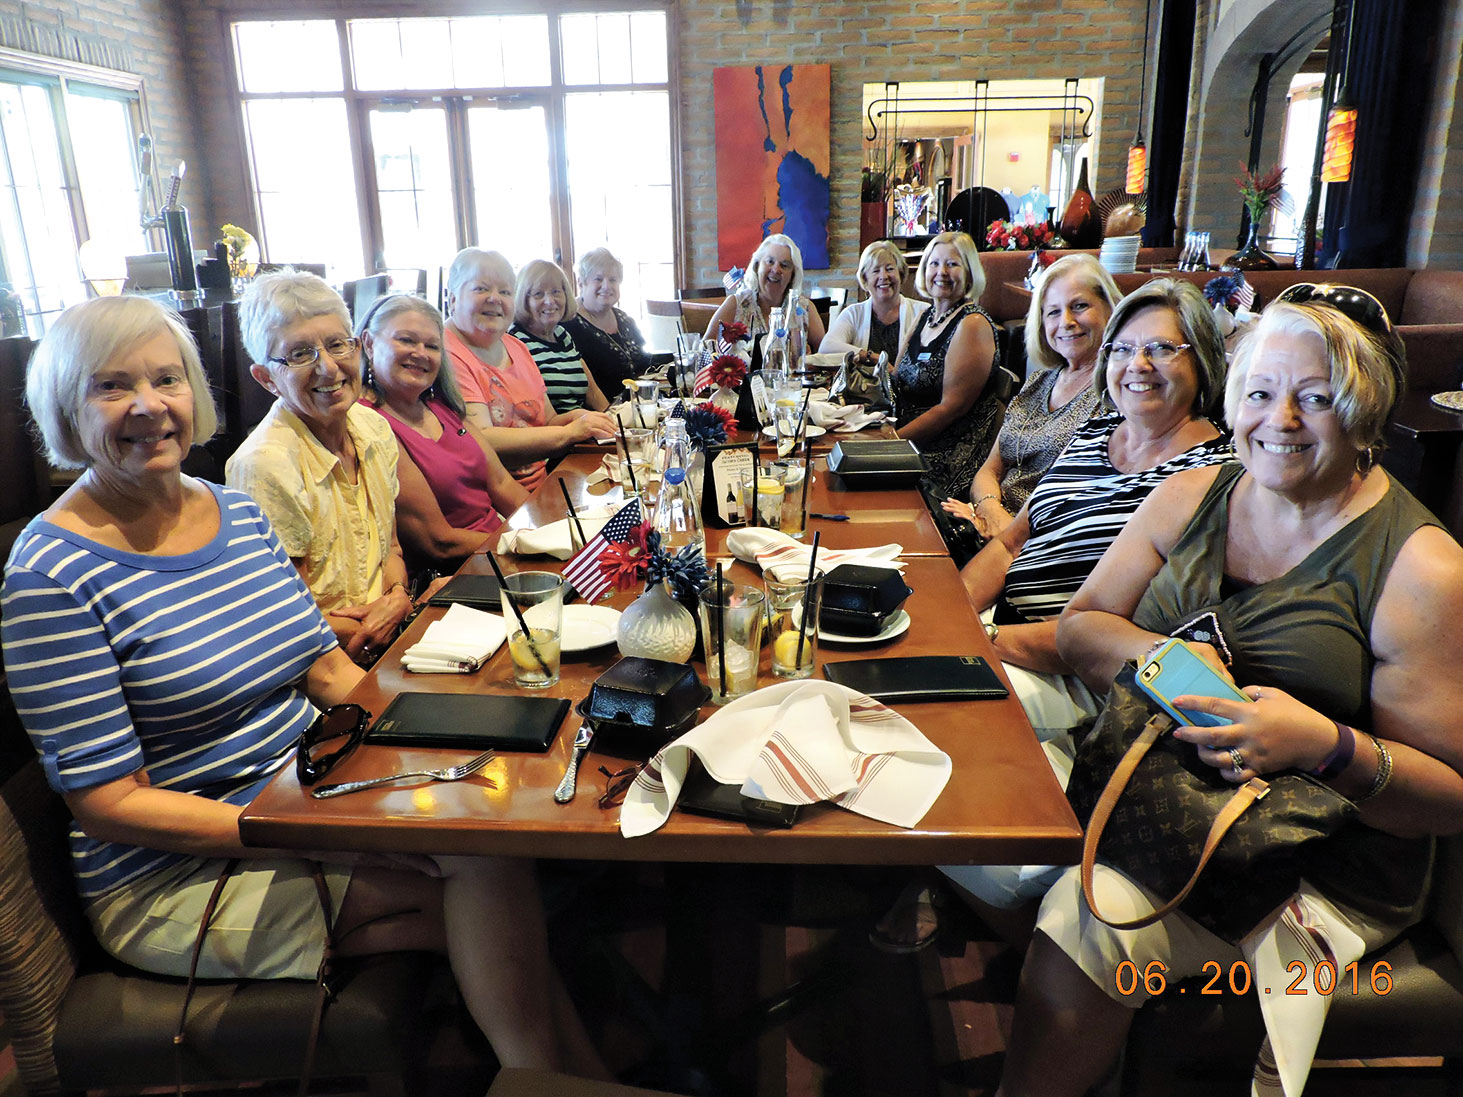 June luncheon at the Verrado Country Club Grill was a hit